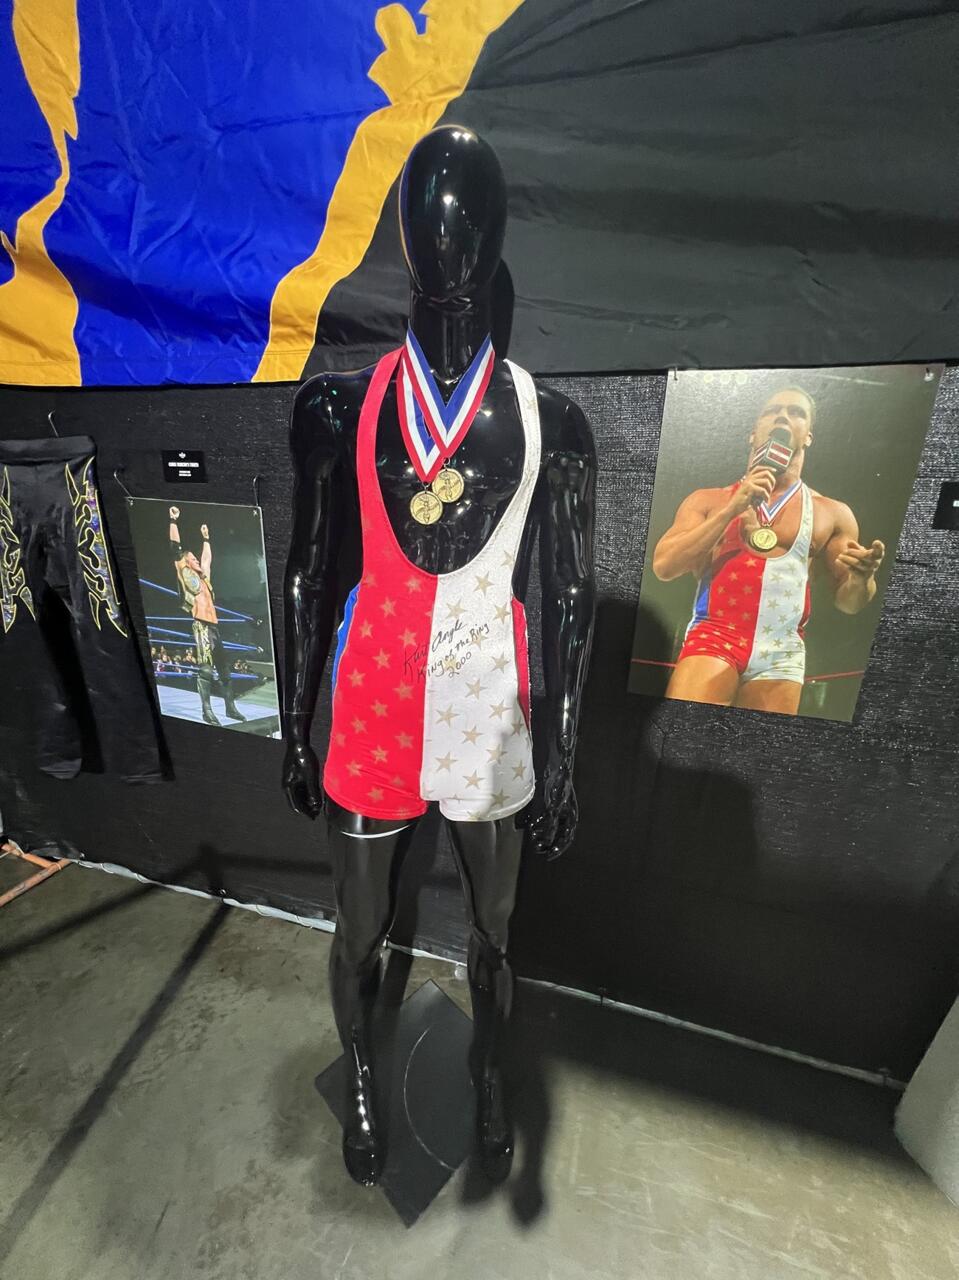 Kurt Angle singlet and gold medals